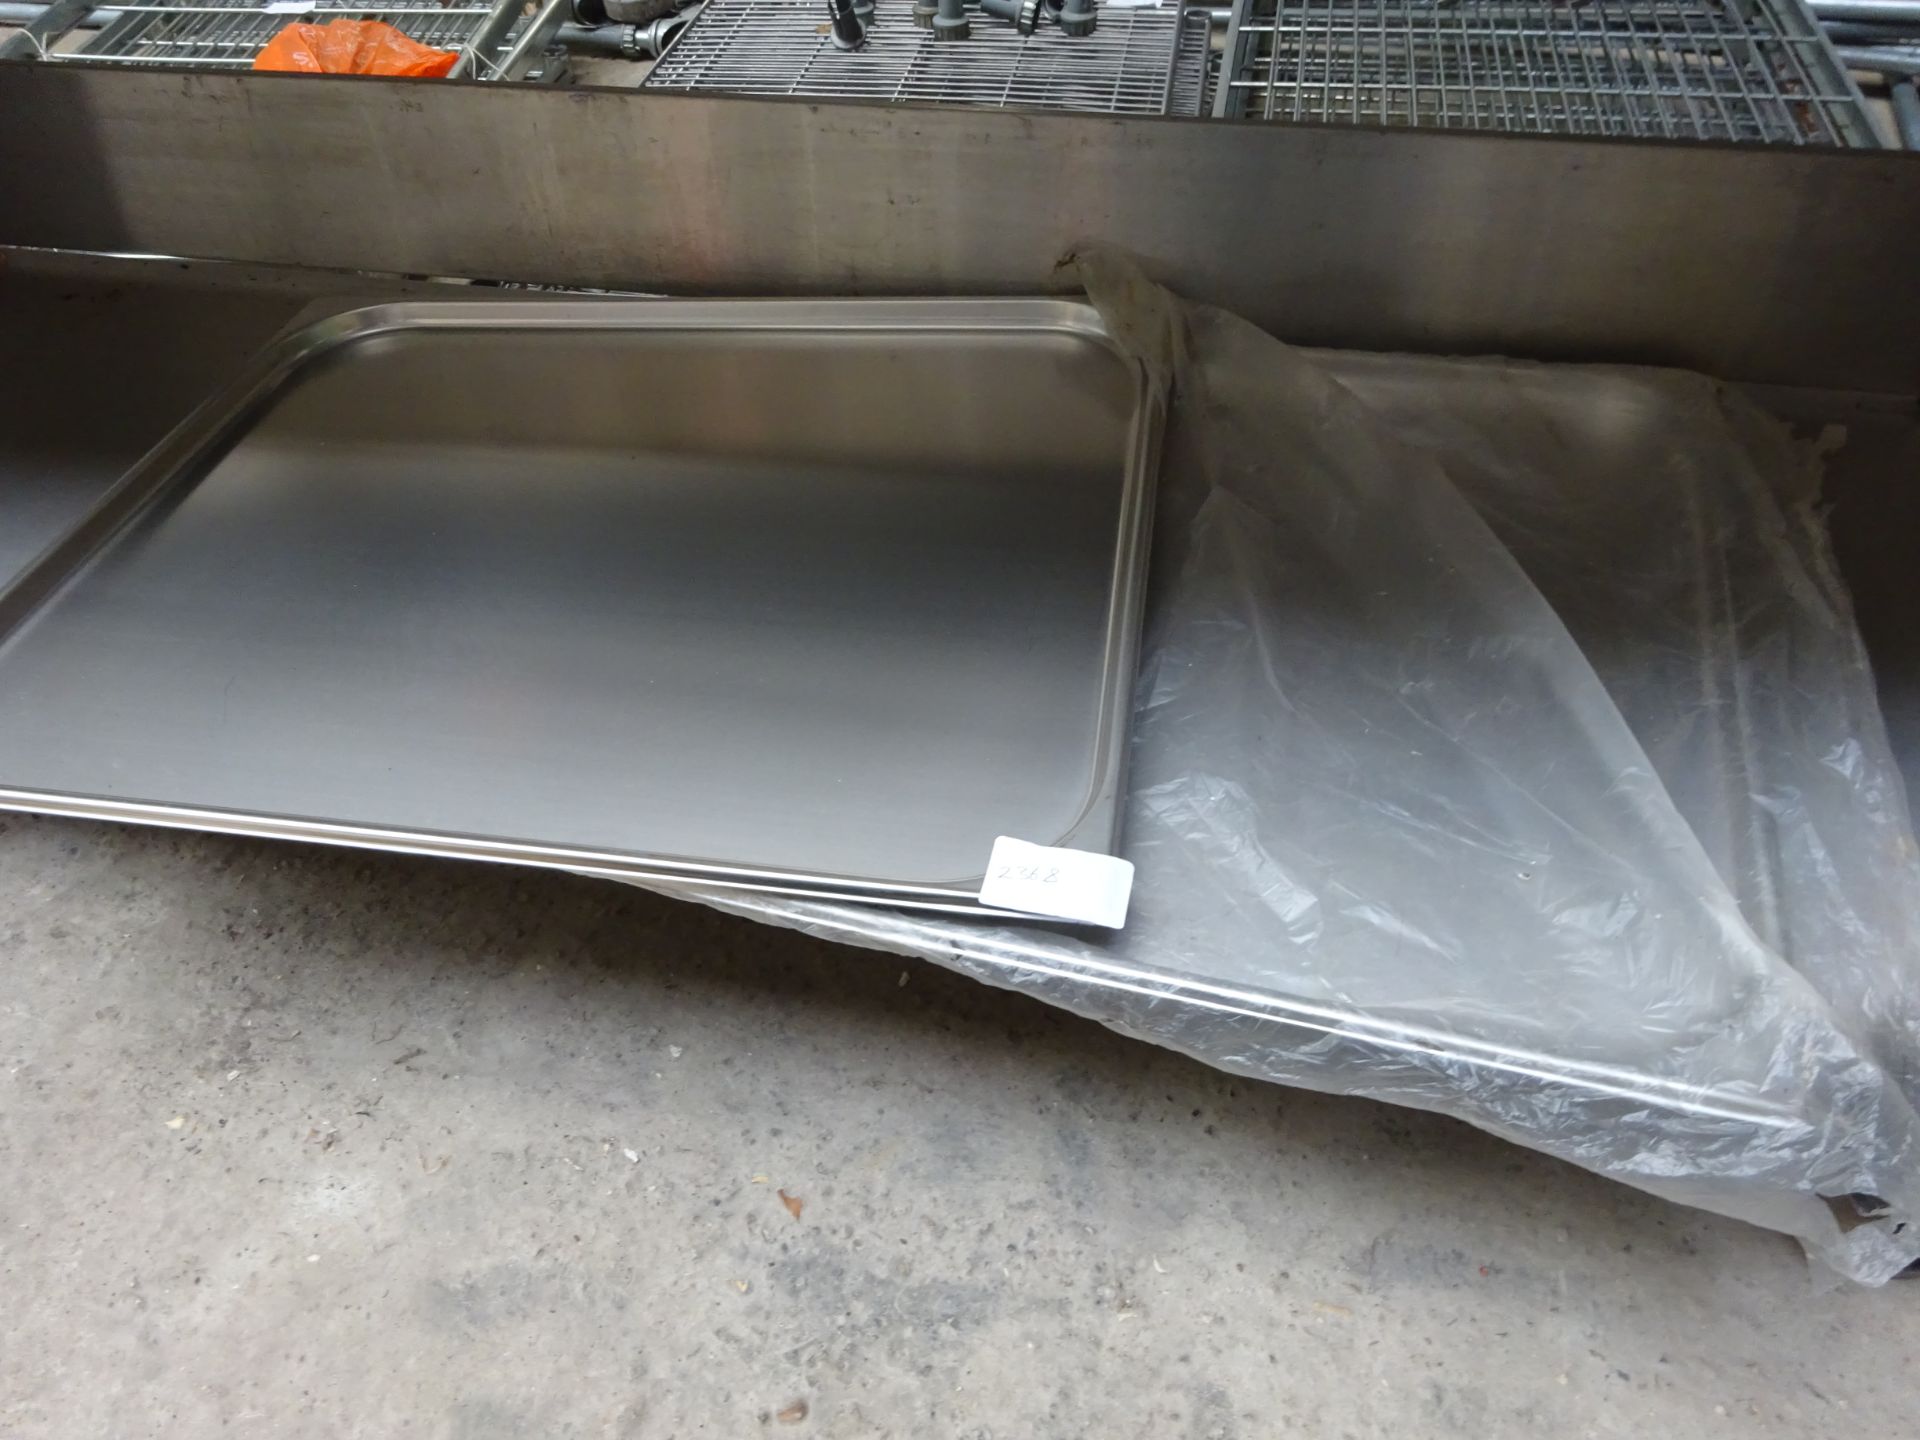 2 large stainless steel trays.